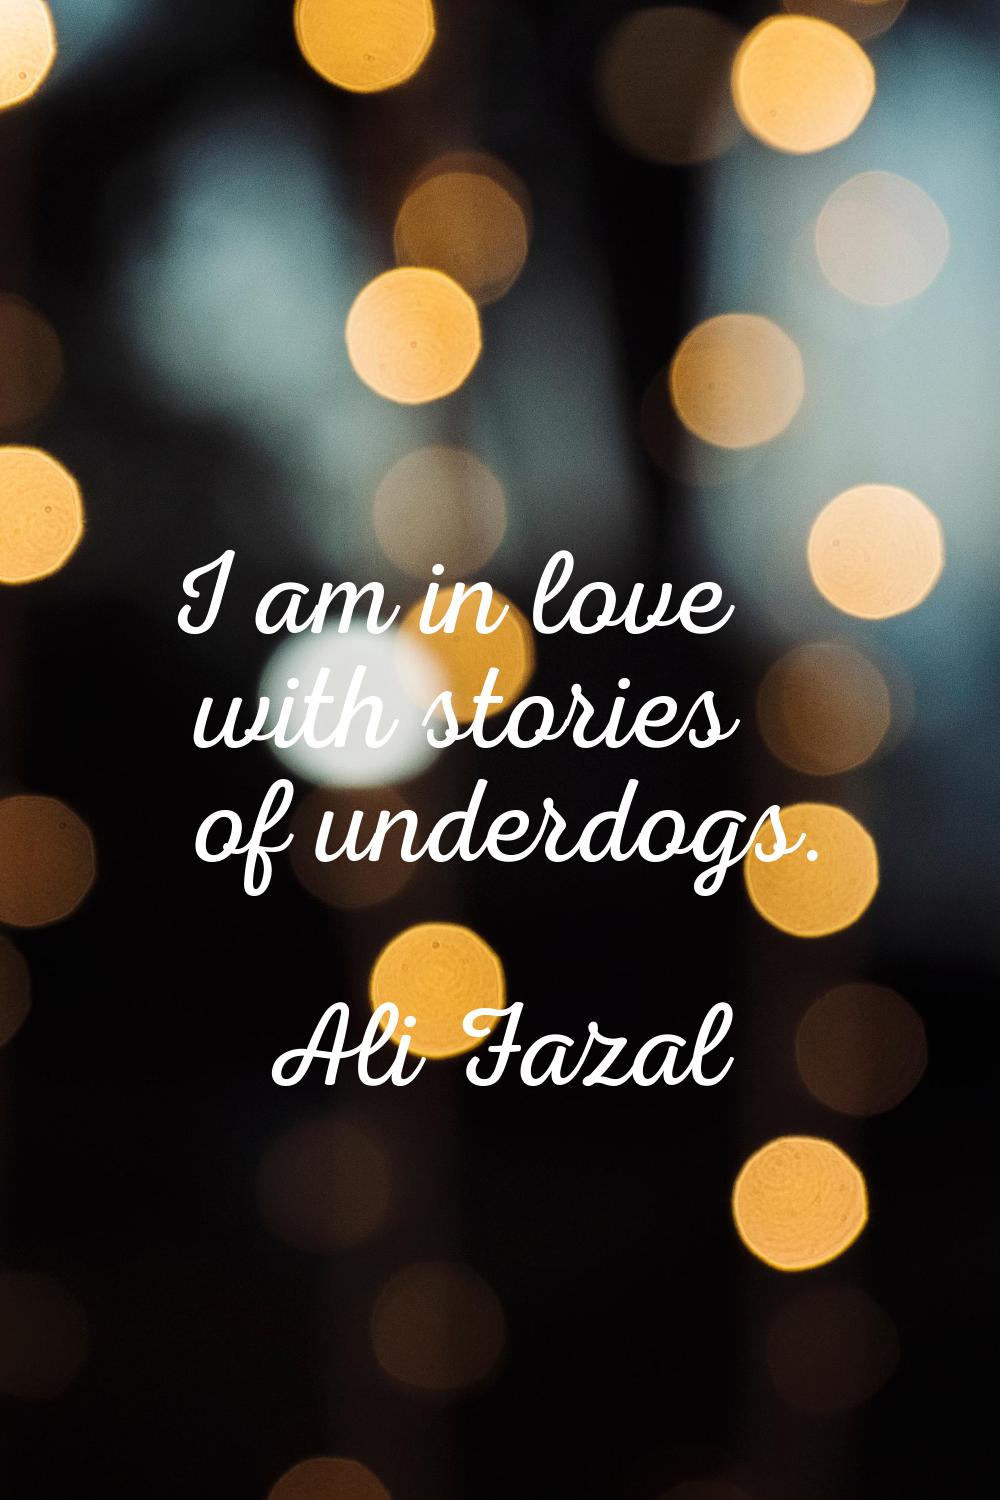 I am in love with stories of underdogs.